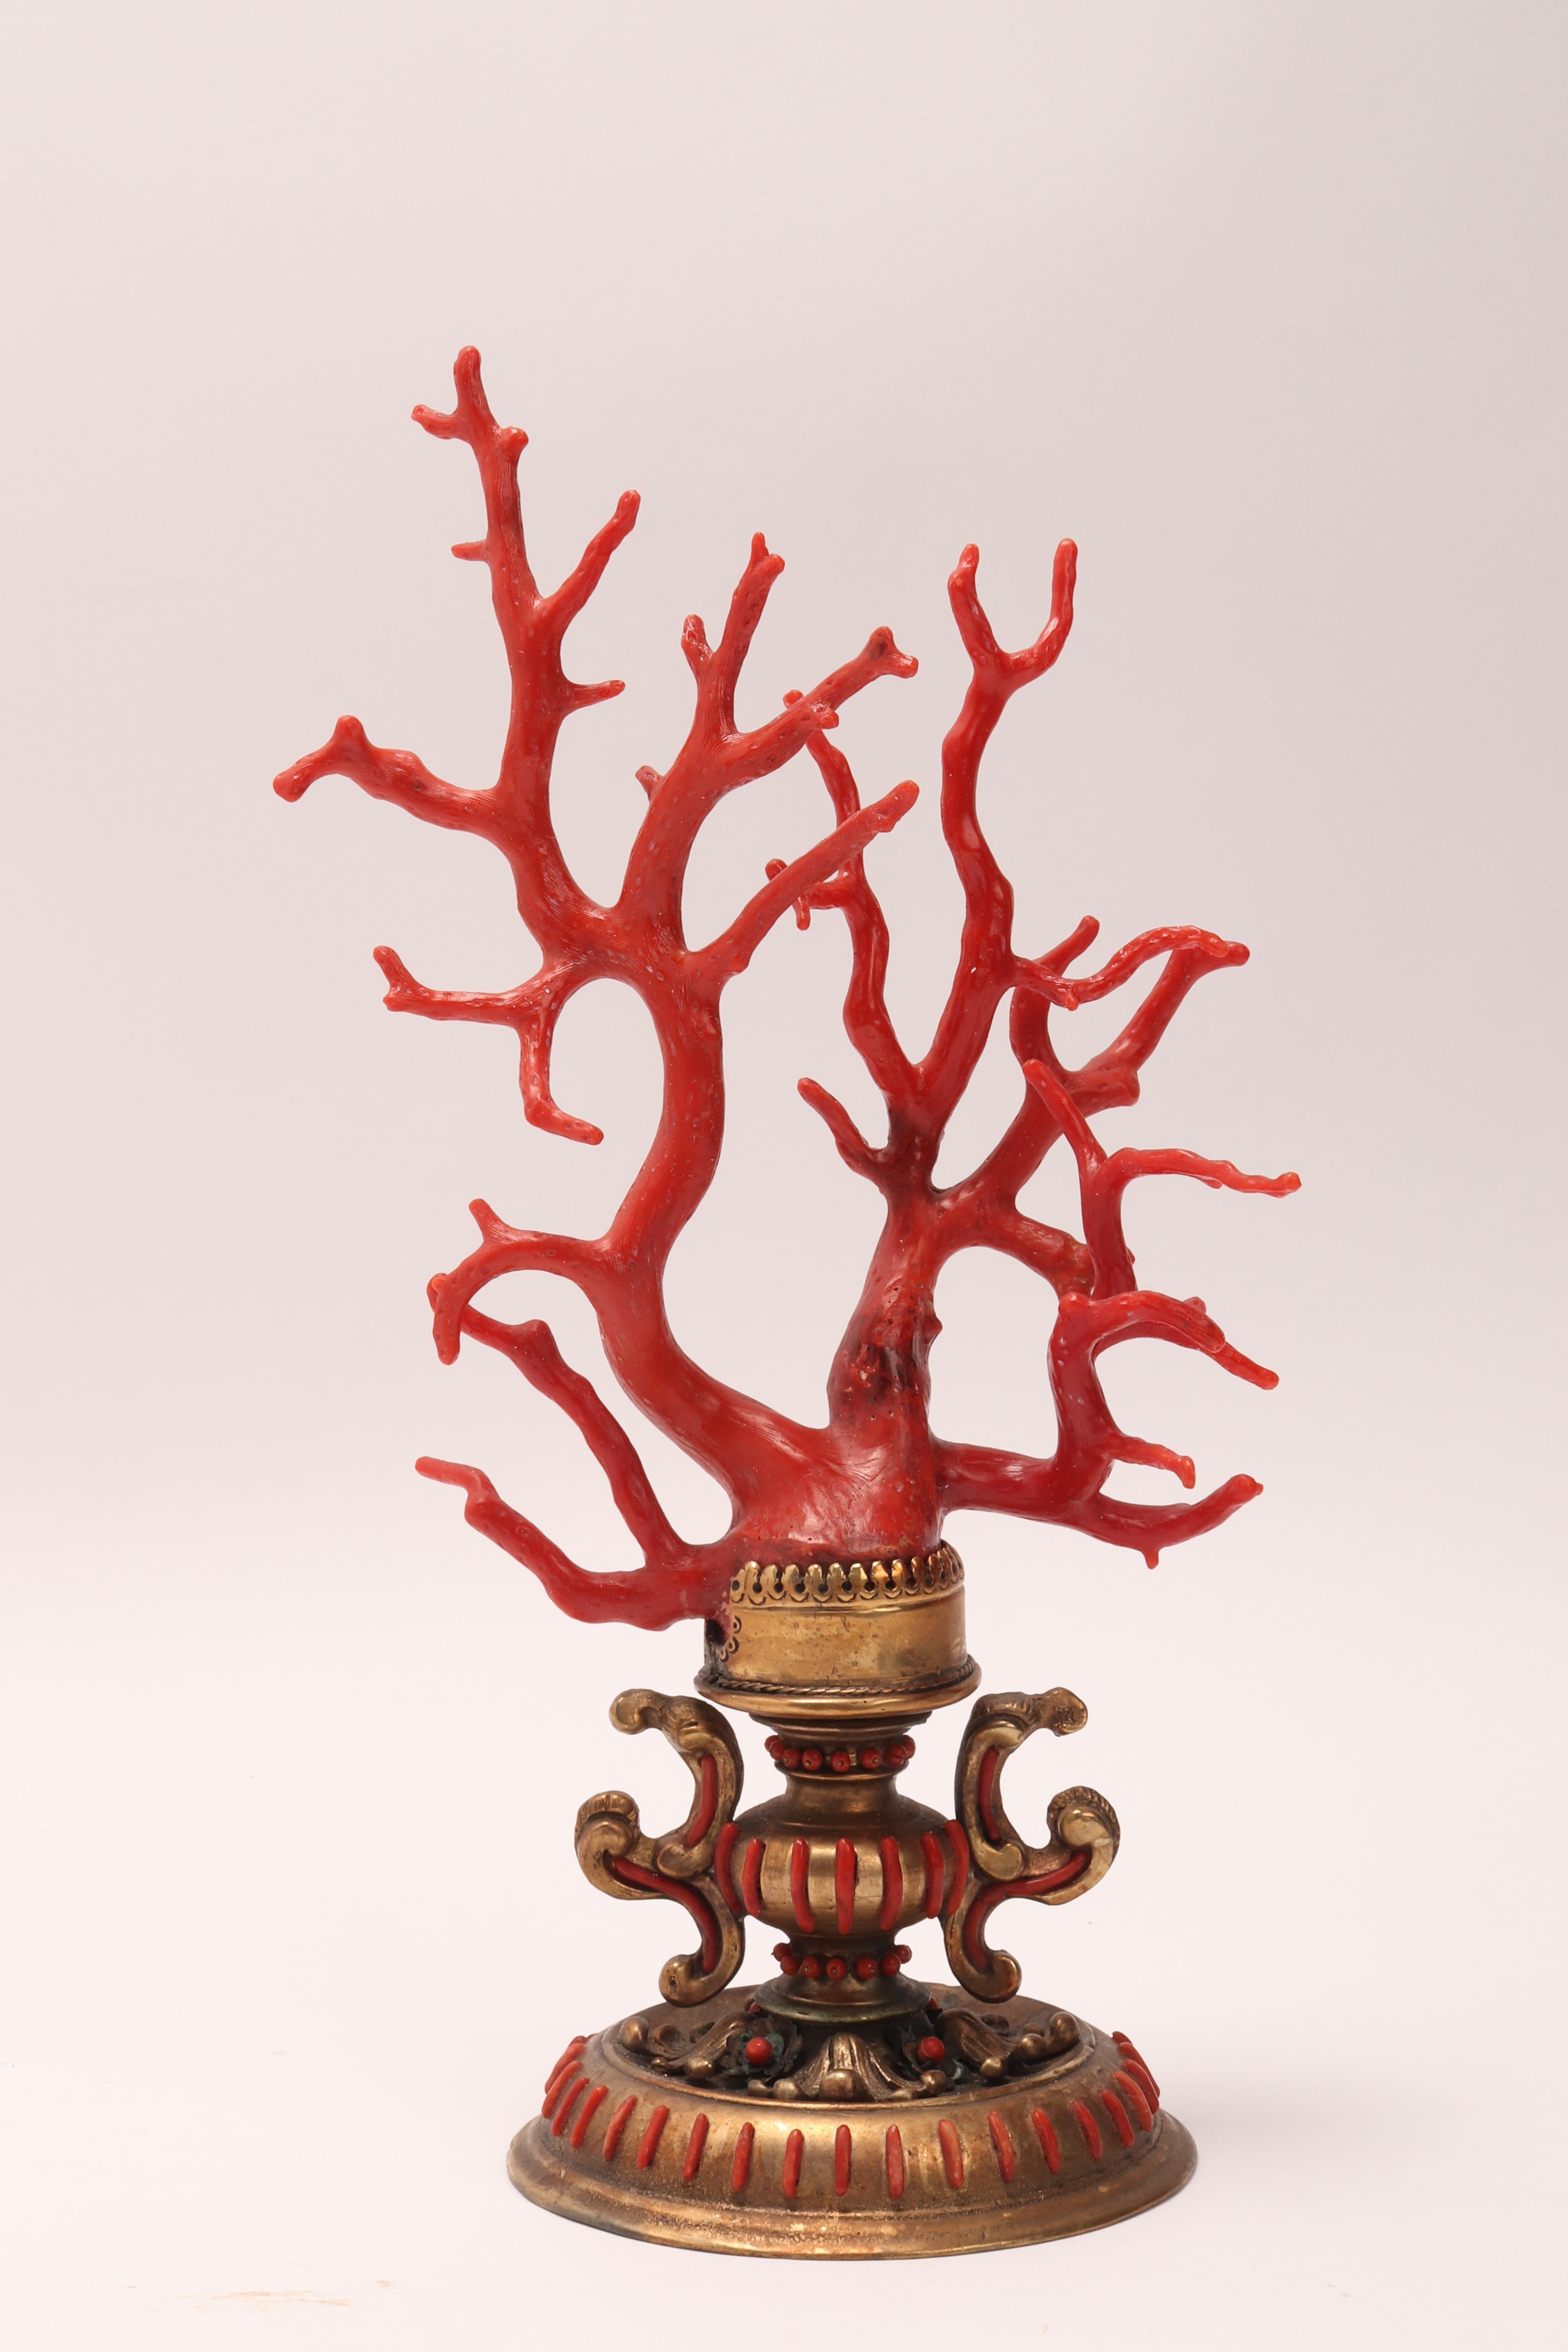 This large branch of Mediterranean coral, 'Corallium Rubrum' is mounted on a gilt bronze base. The realization of the base involves different techniques: the lost wax casting, the casting in the mold, the hammered. All finely chiseled by hand. The